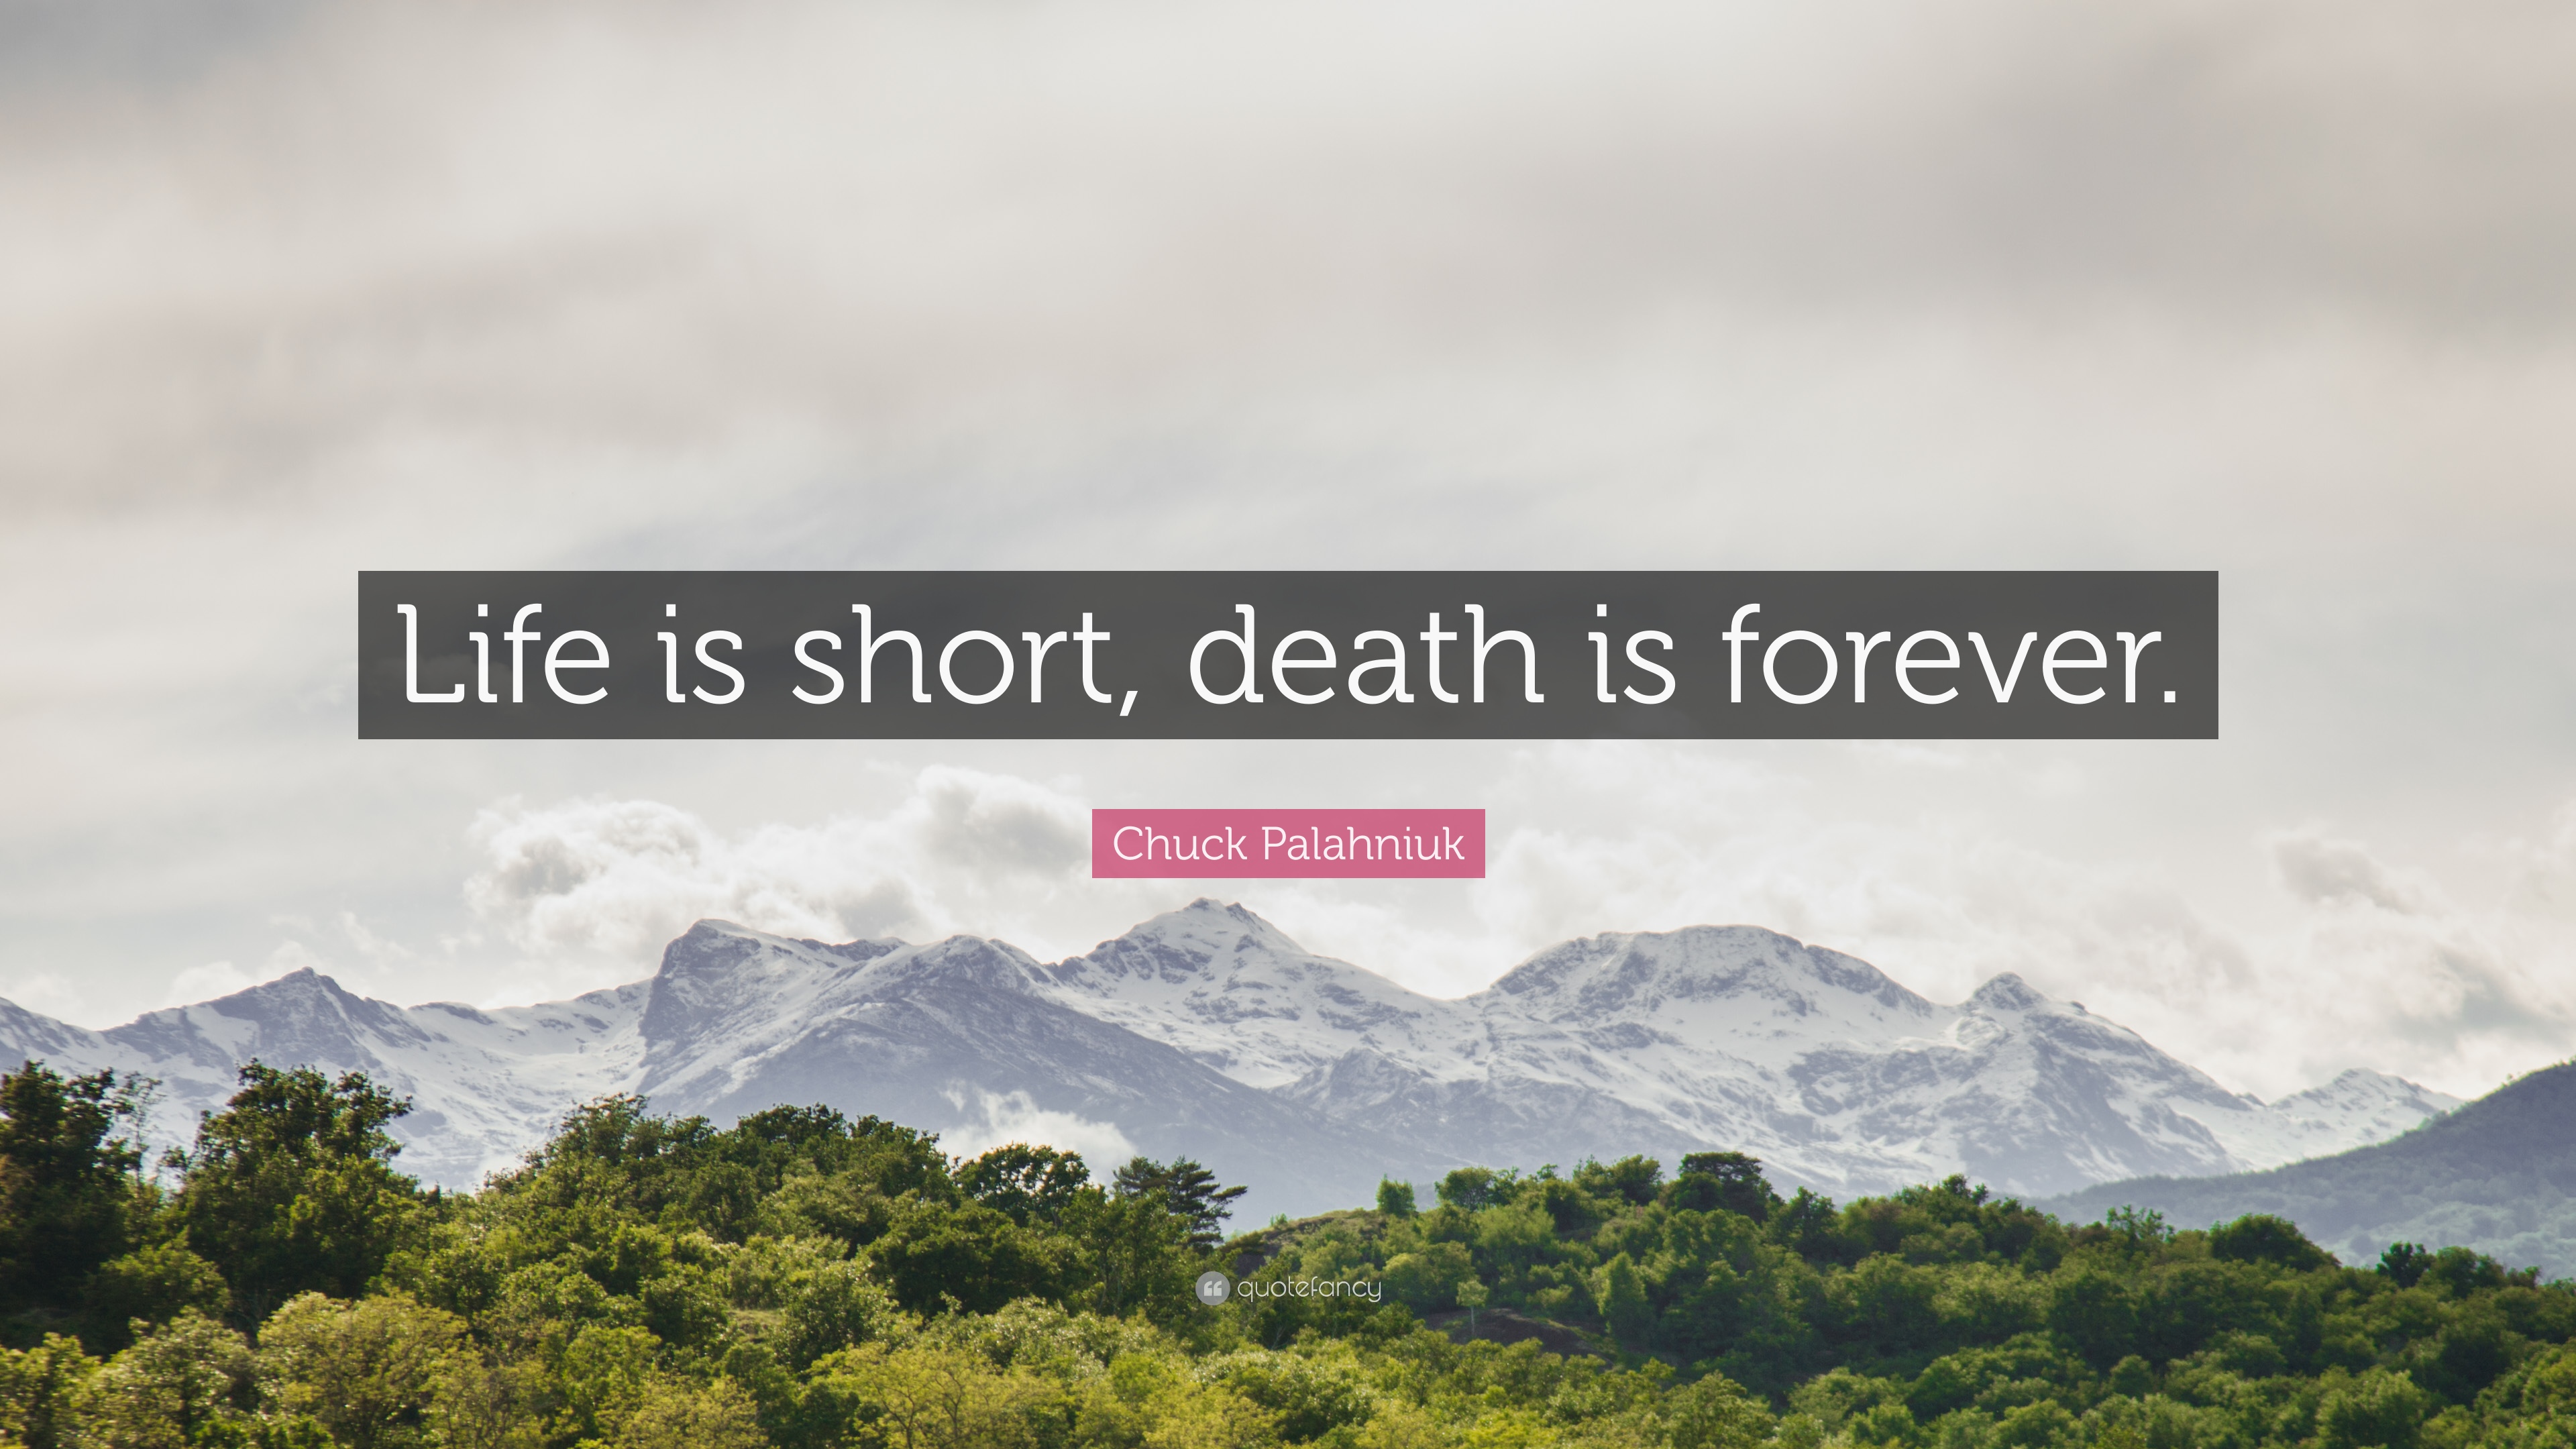 Life is short, death is forever. Chuck Palahniuk